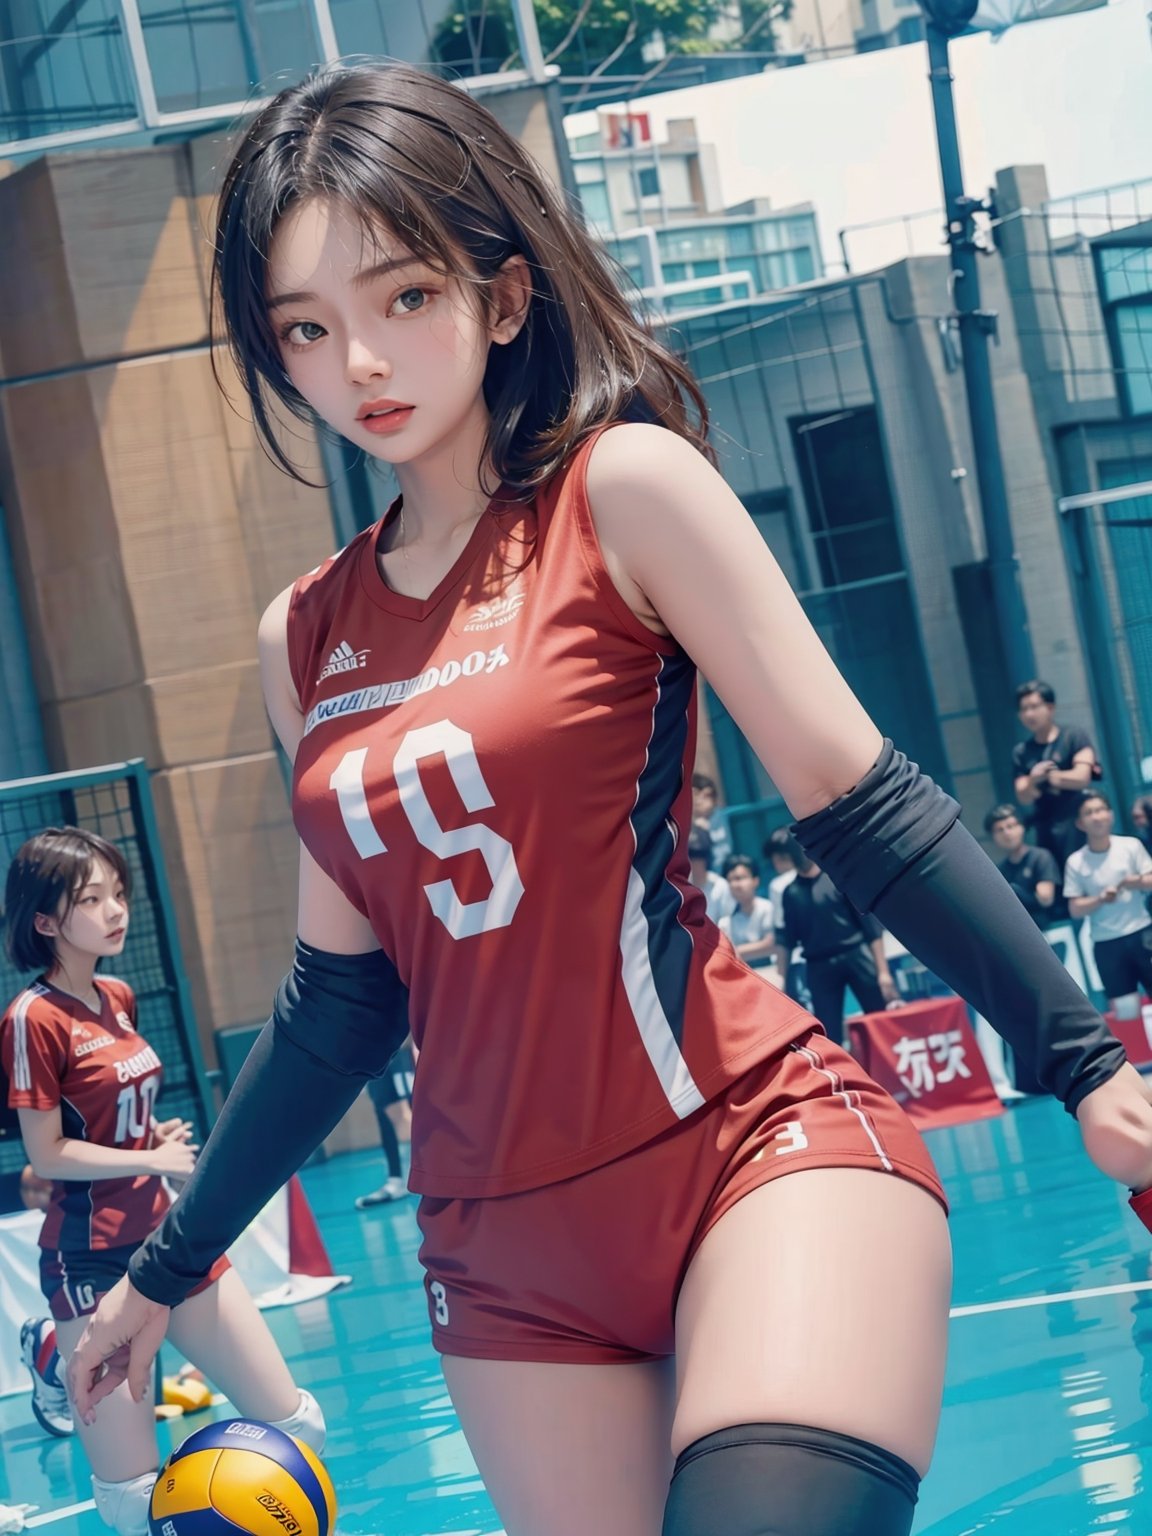 1 girl, play volleyball, (dynamic volleyball player pose:0.5),asian girl,jennie,b3rli